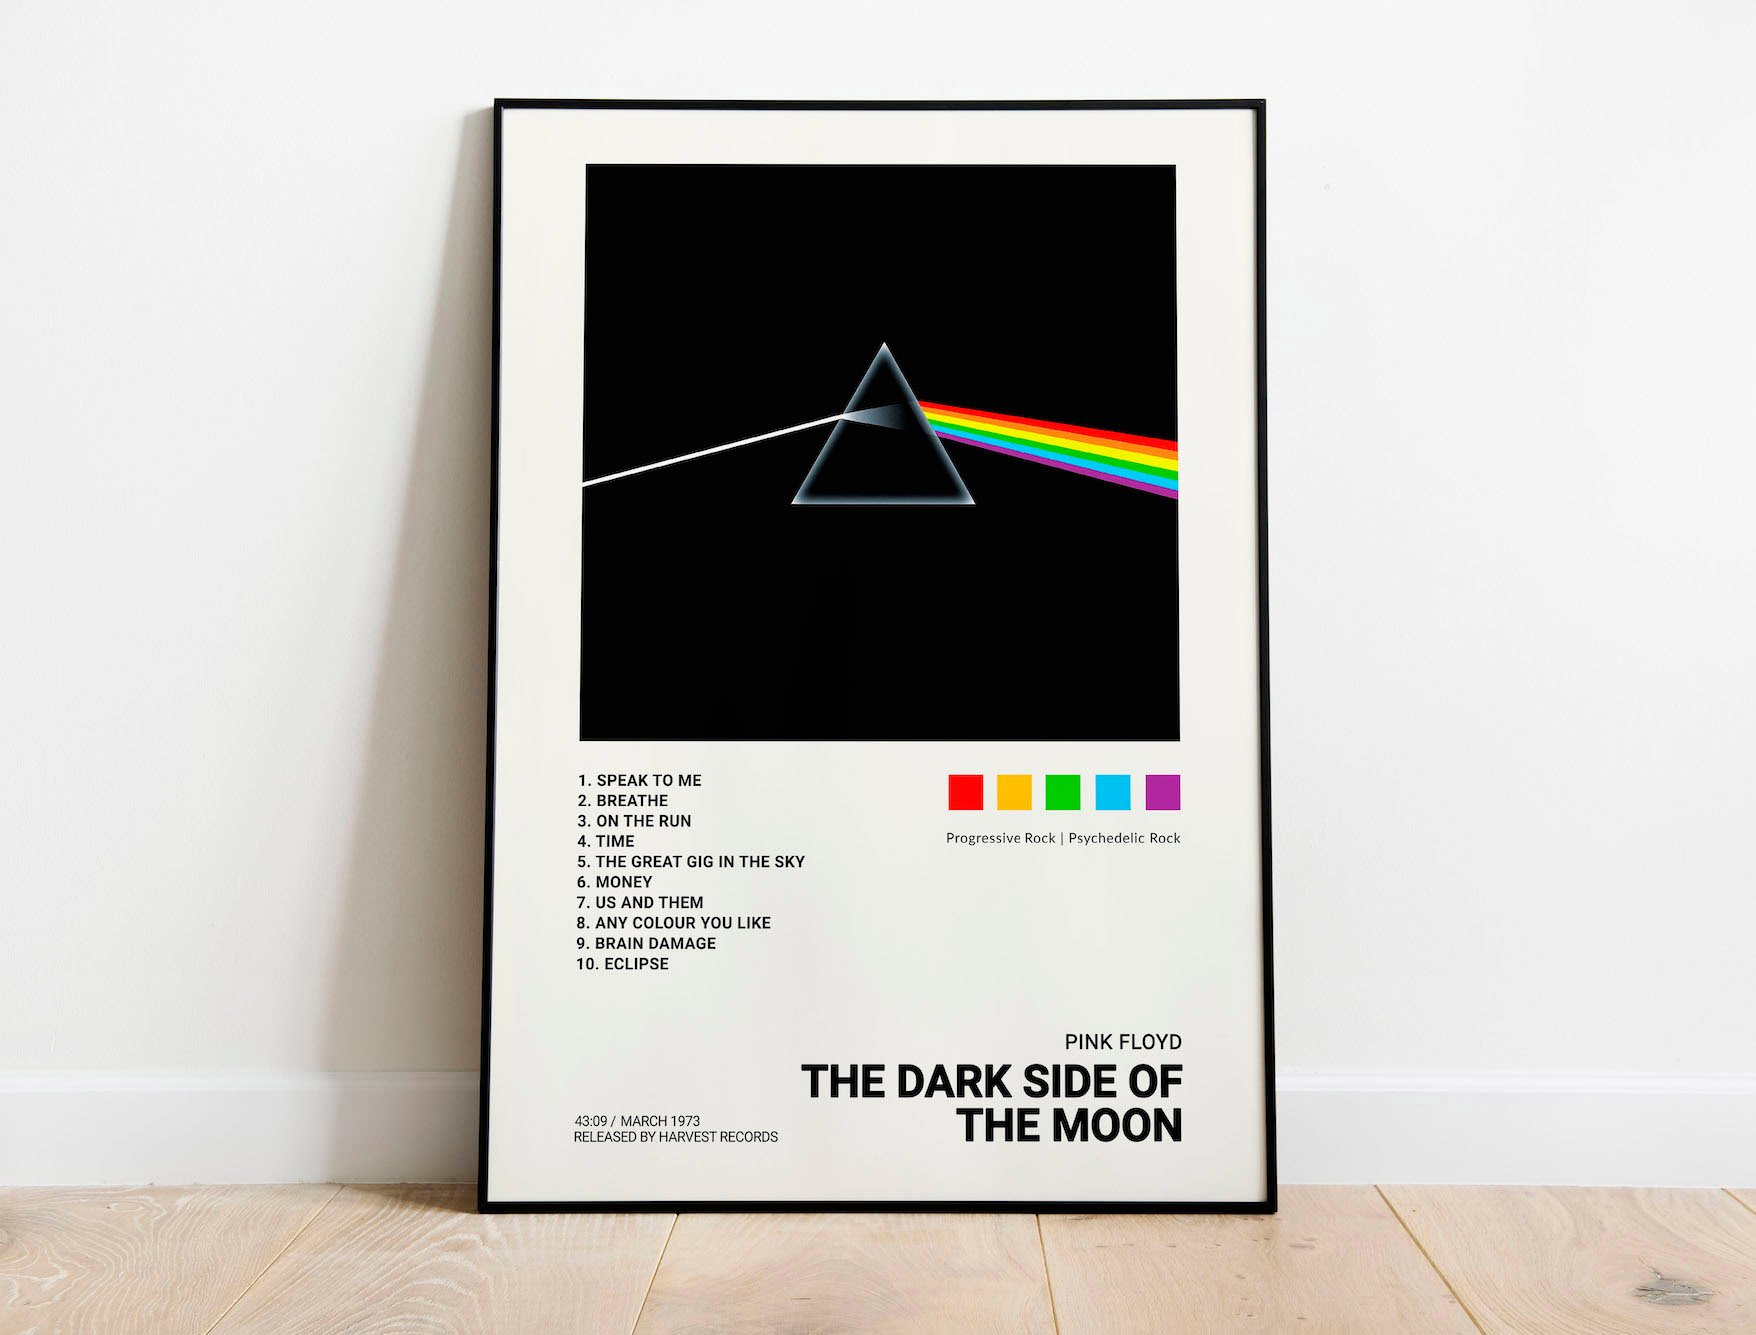 Pink Floyd - The Dark Side of the Moon, Album Cover Poster